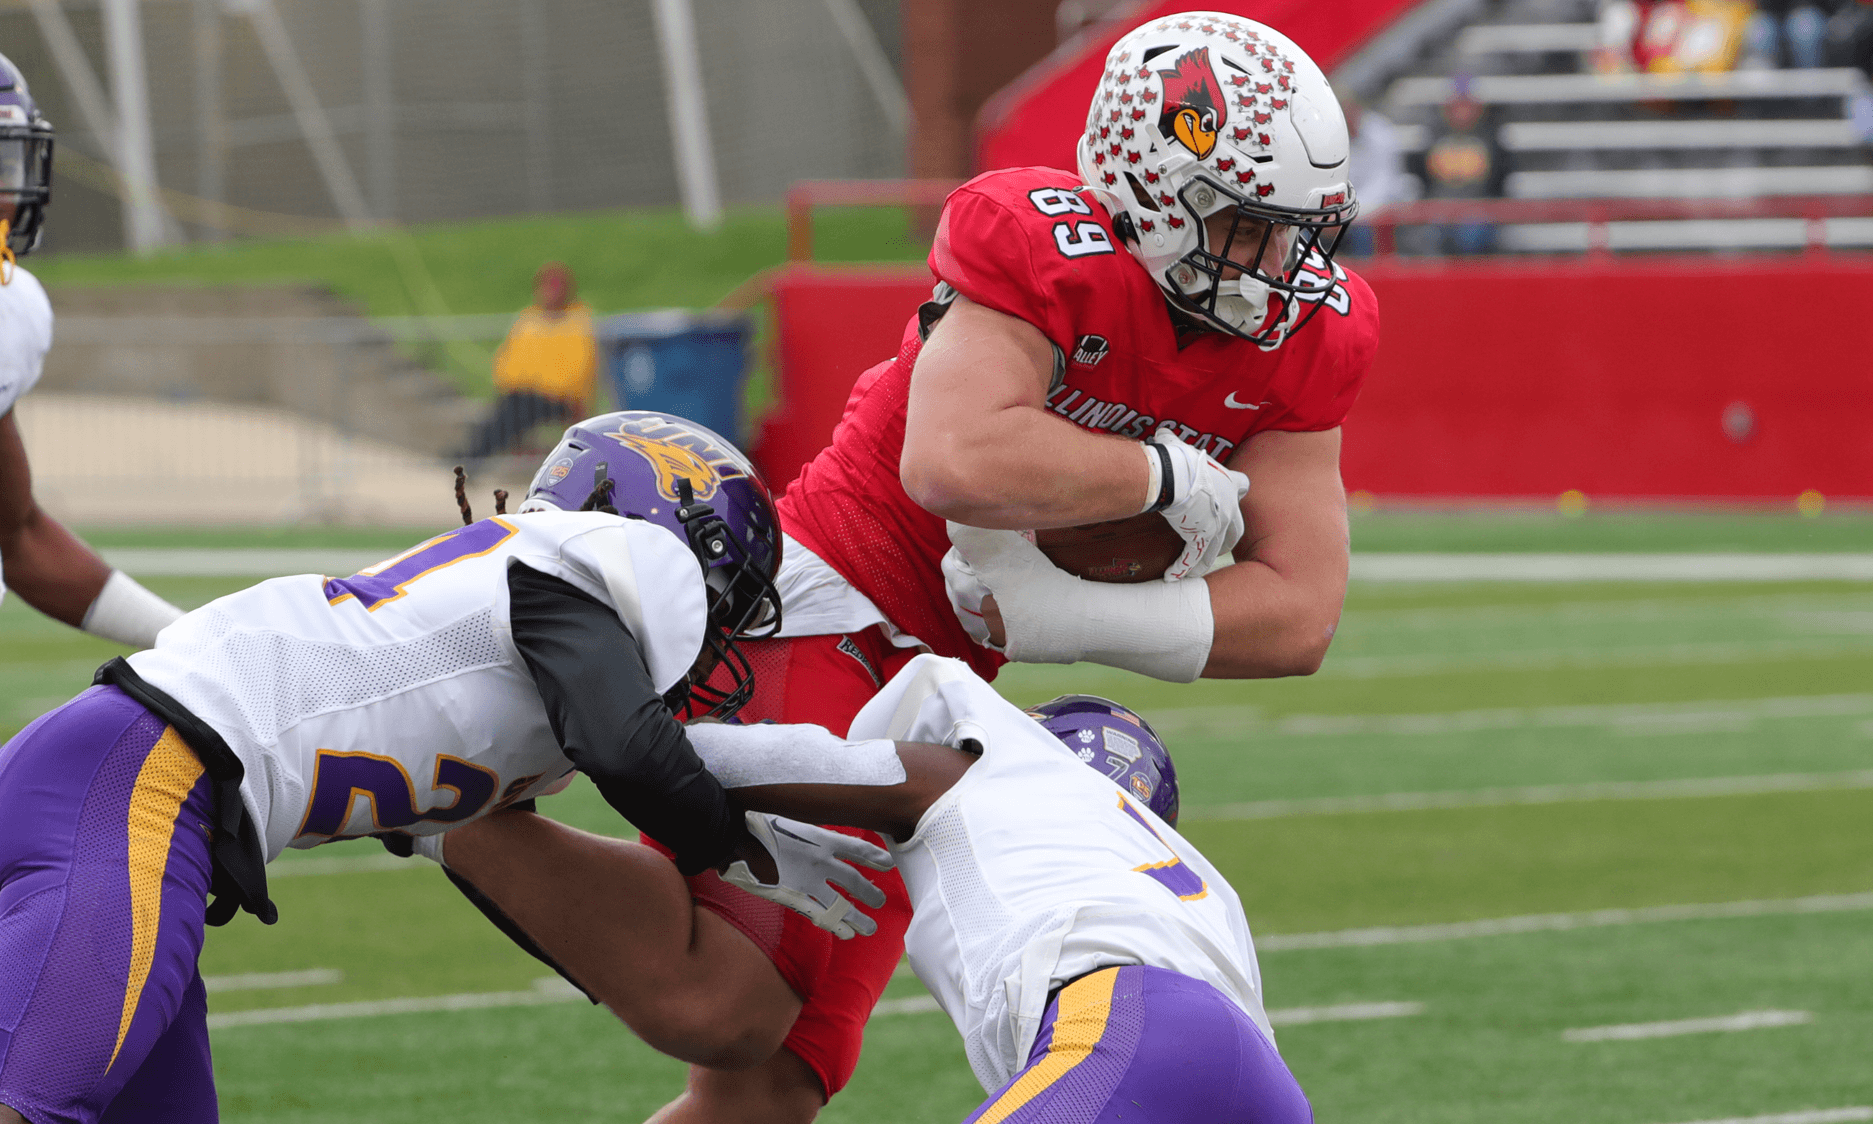 Cam Grandy has been a pivotal part of the Illinois State offense as a reliable receiver and quality blocker. Senior Hula Bowl scout Mike Bey breaks down Grandy as an NFL Prospect in his report.